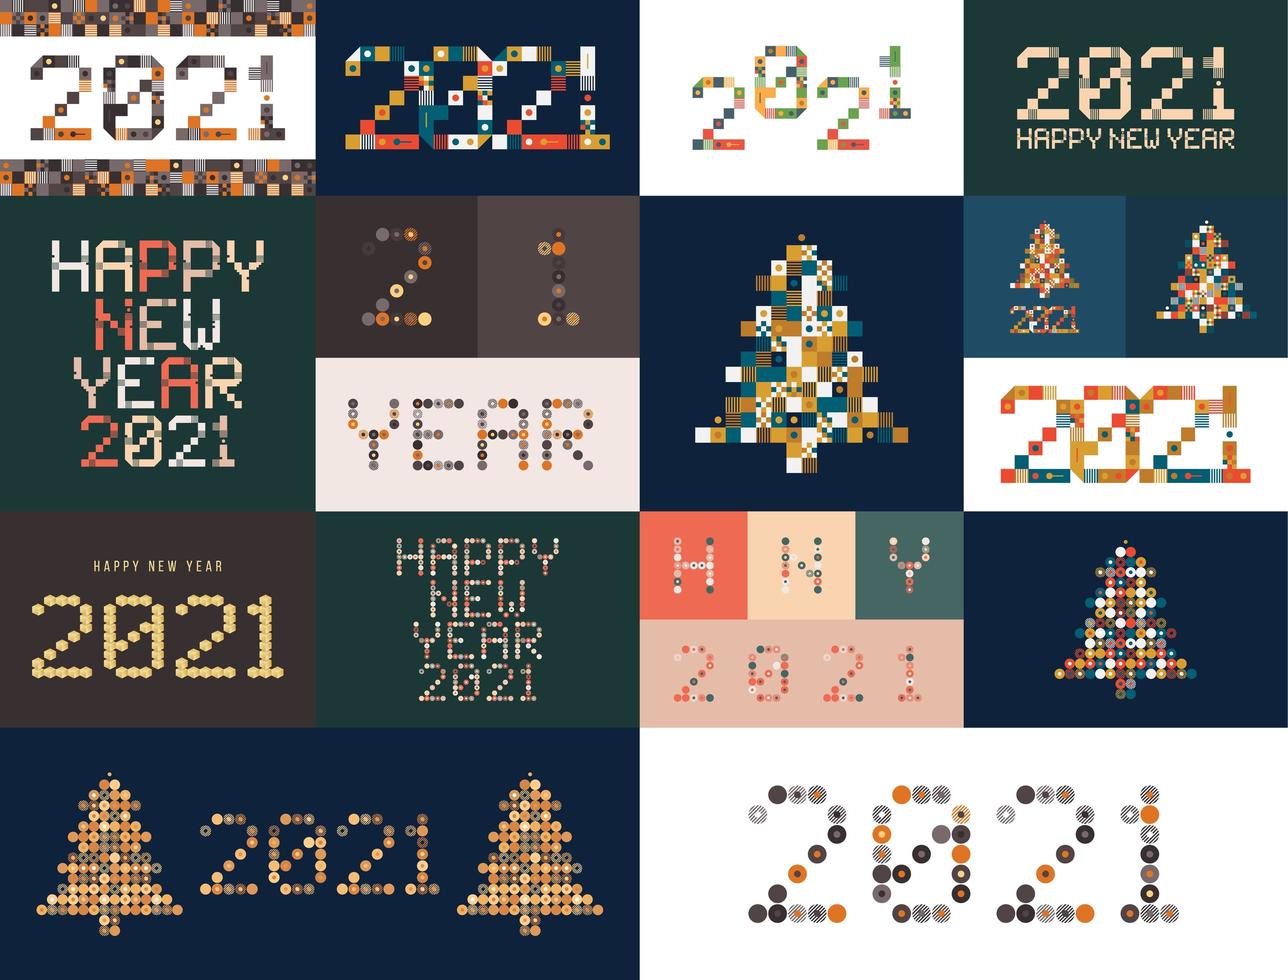 New Year diverse unusual sign set for 2021 event decoration, cute graphic, creative emblem concept for banner, brochure, flyer, calendar, greeting card, event invitation. Isolated vector logotype.